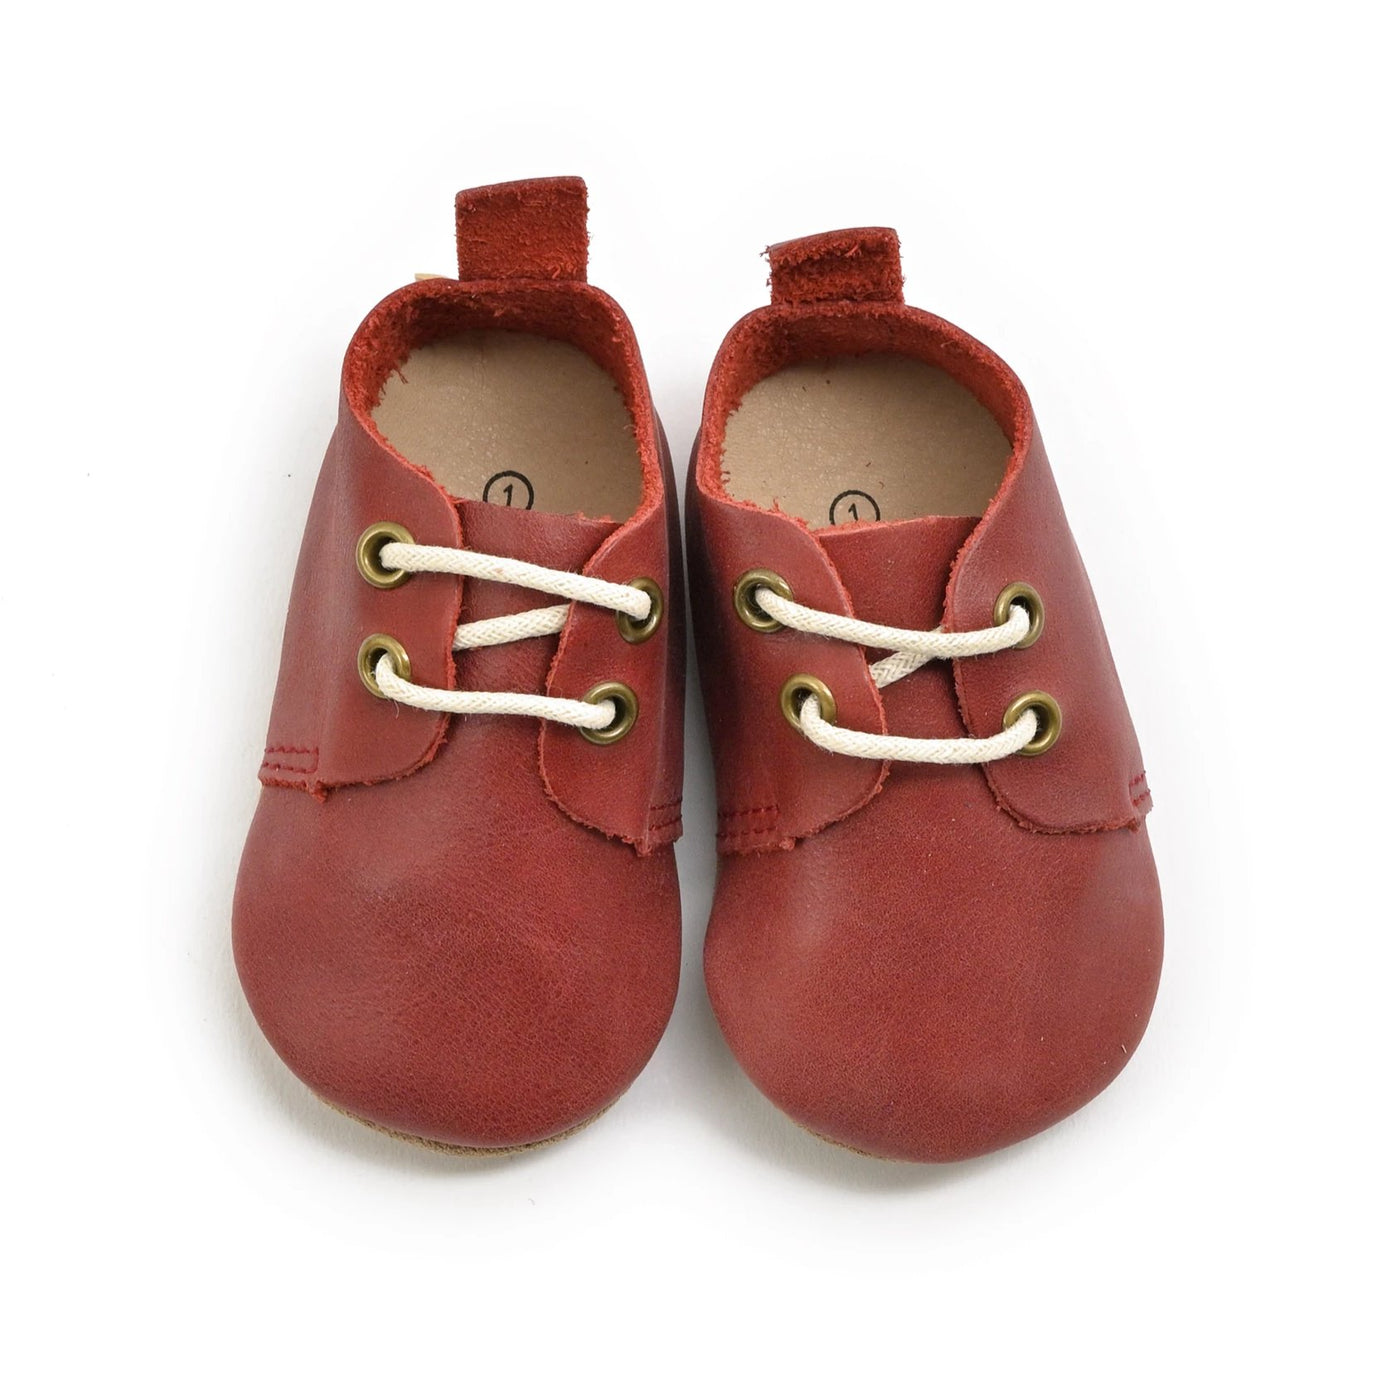 Burgundy - Low Top Oxfords - Soft Sole